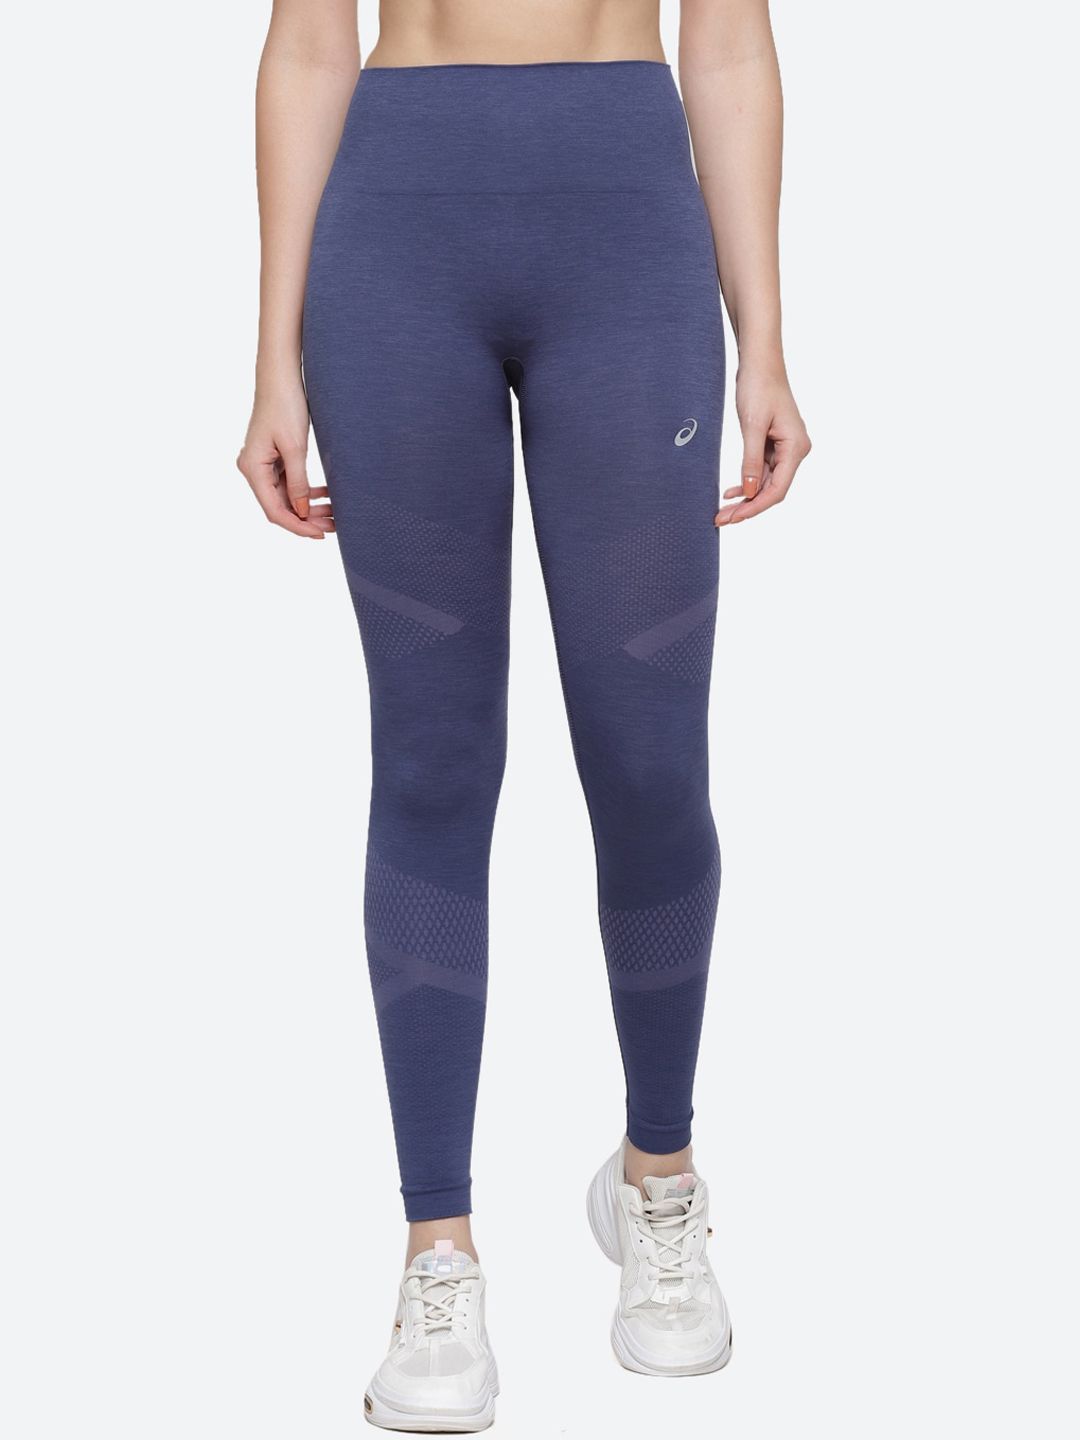 ASICS Women Blue Solid SEAMLESS Tights Price in India